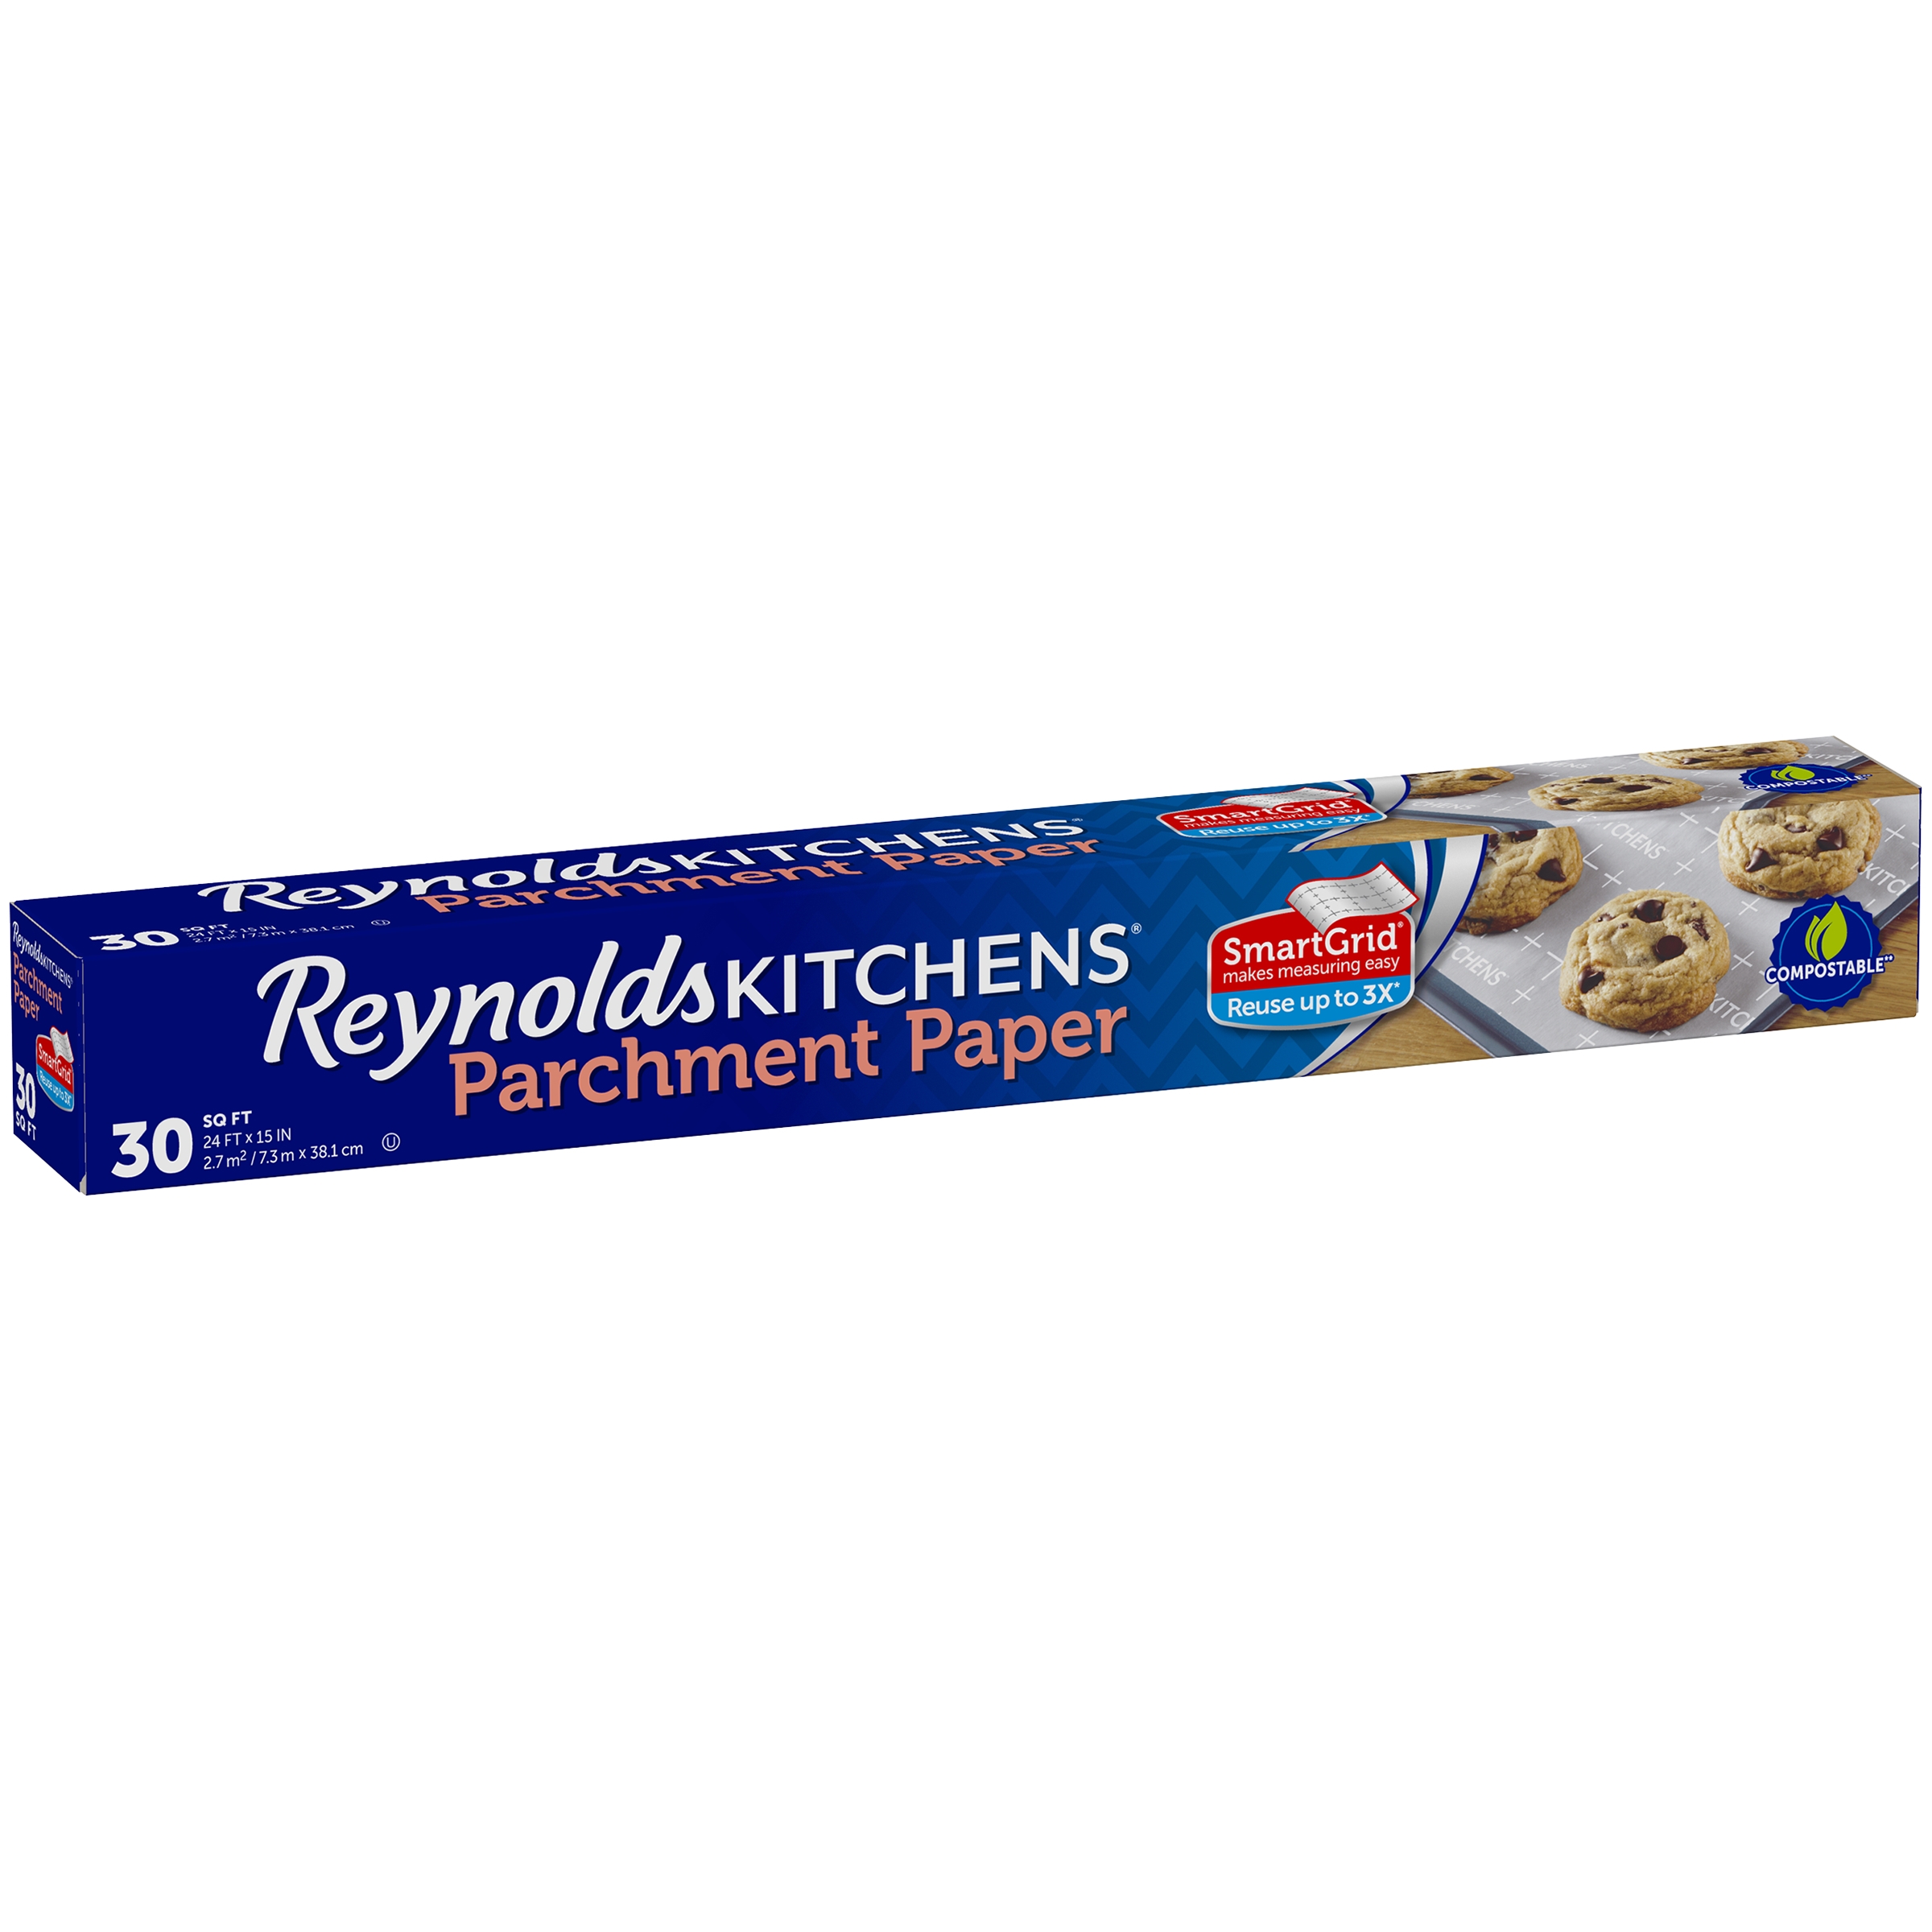 Reynolds Kitchens Parchment Paper (SmartGrid, Non-Stick, 30-Square Foot Roll) - image 1 of 5